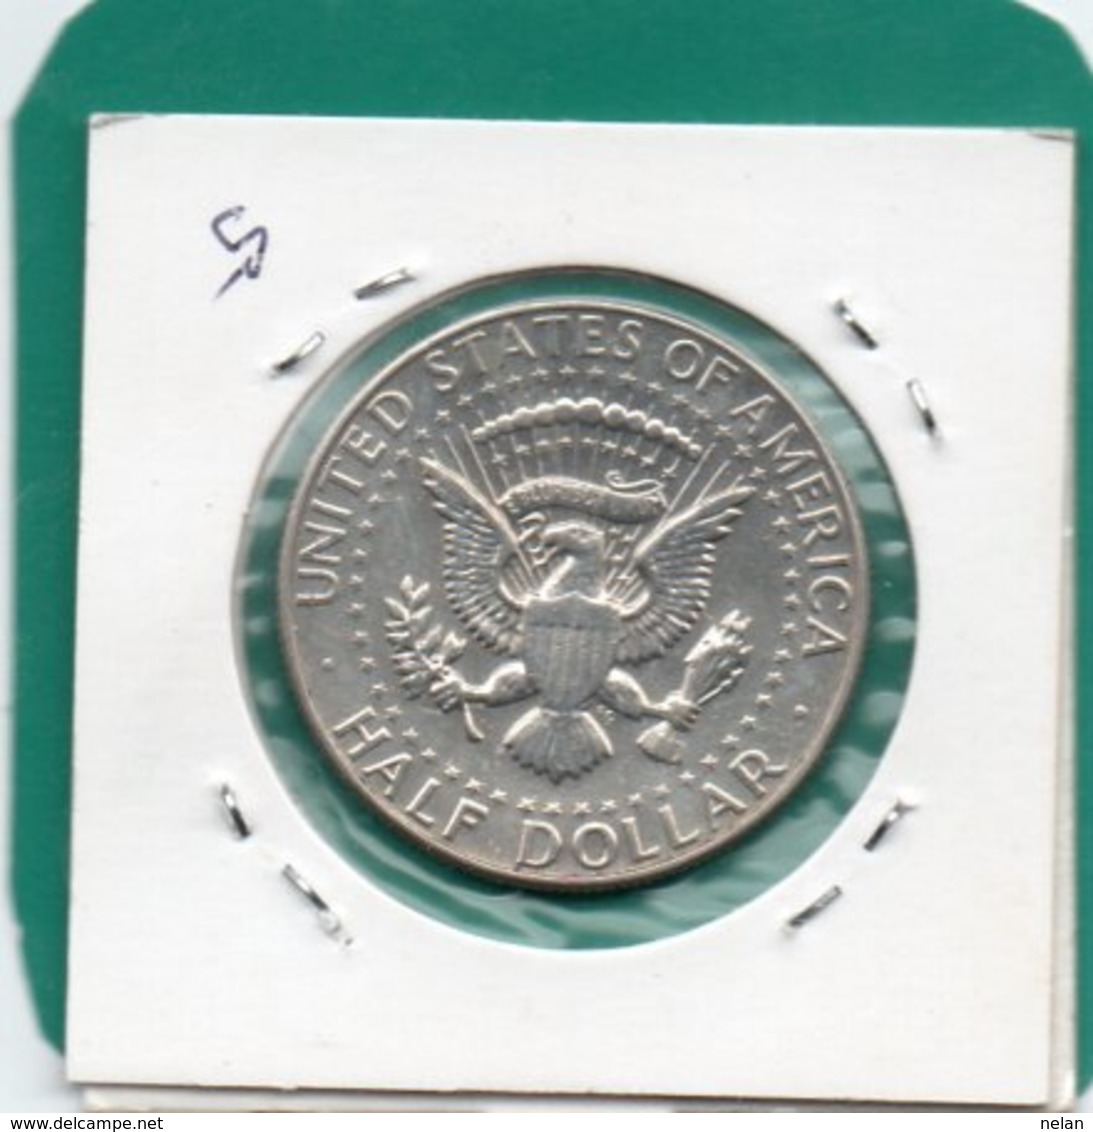 UNITED STATES OF AMERICA  50 CENTS 1967   KM-2002a  SILVER AUNC - 1964-…: Kennedy